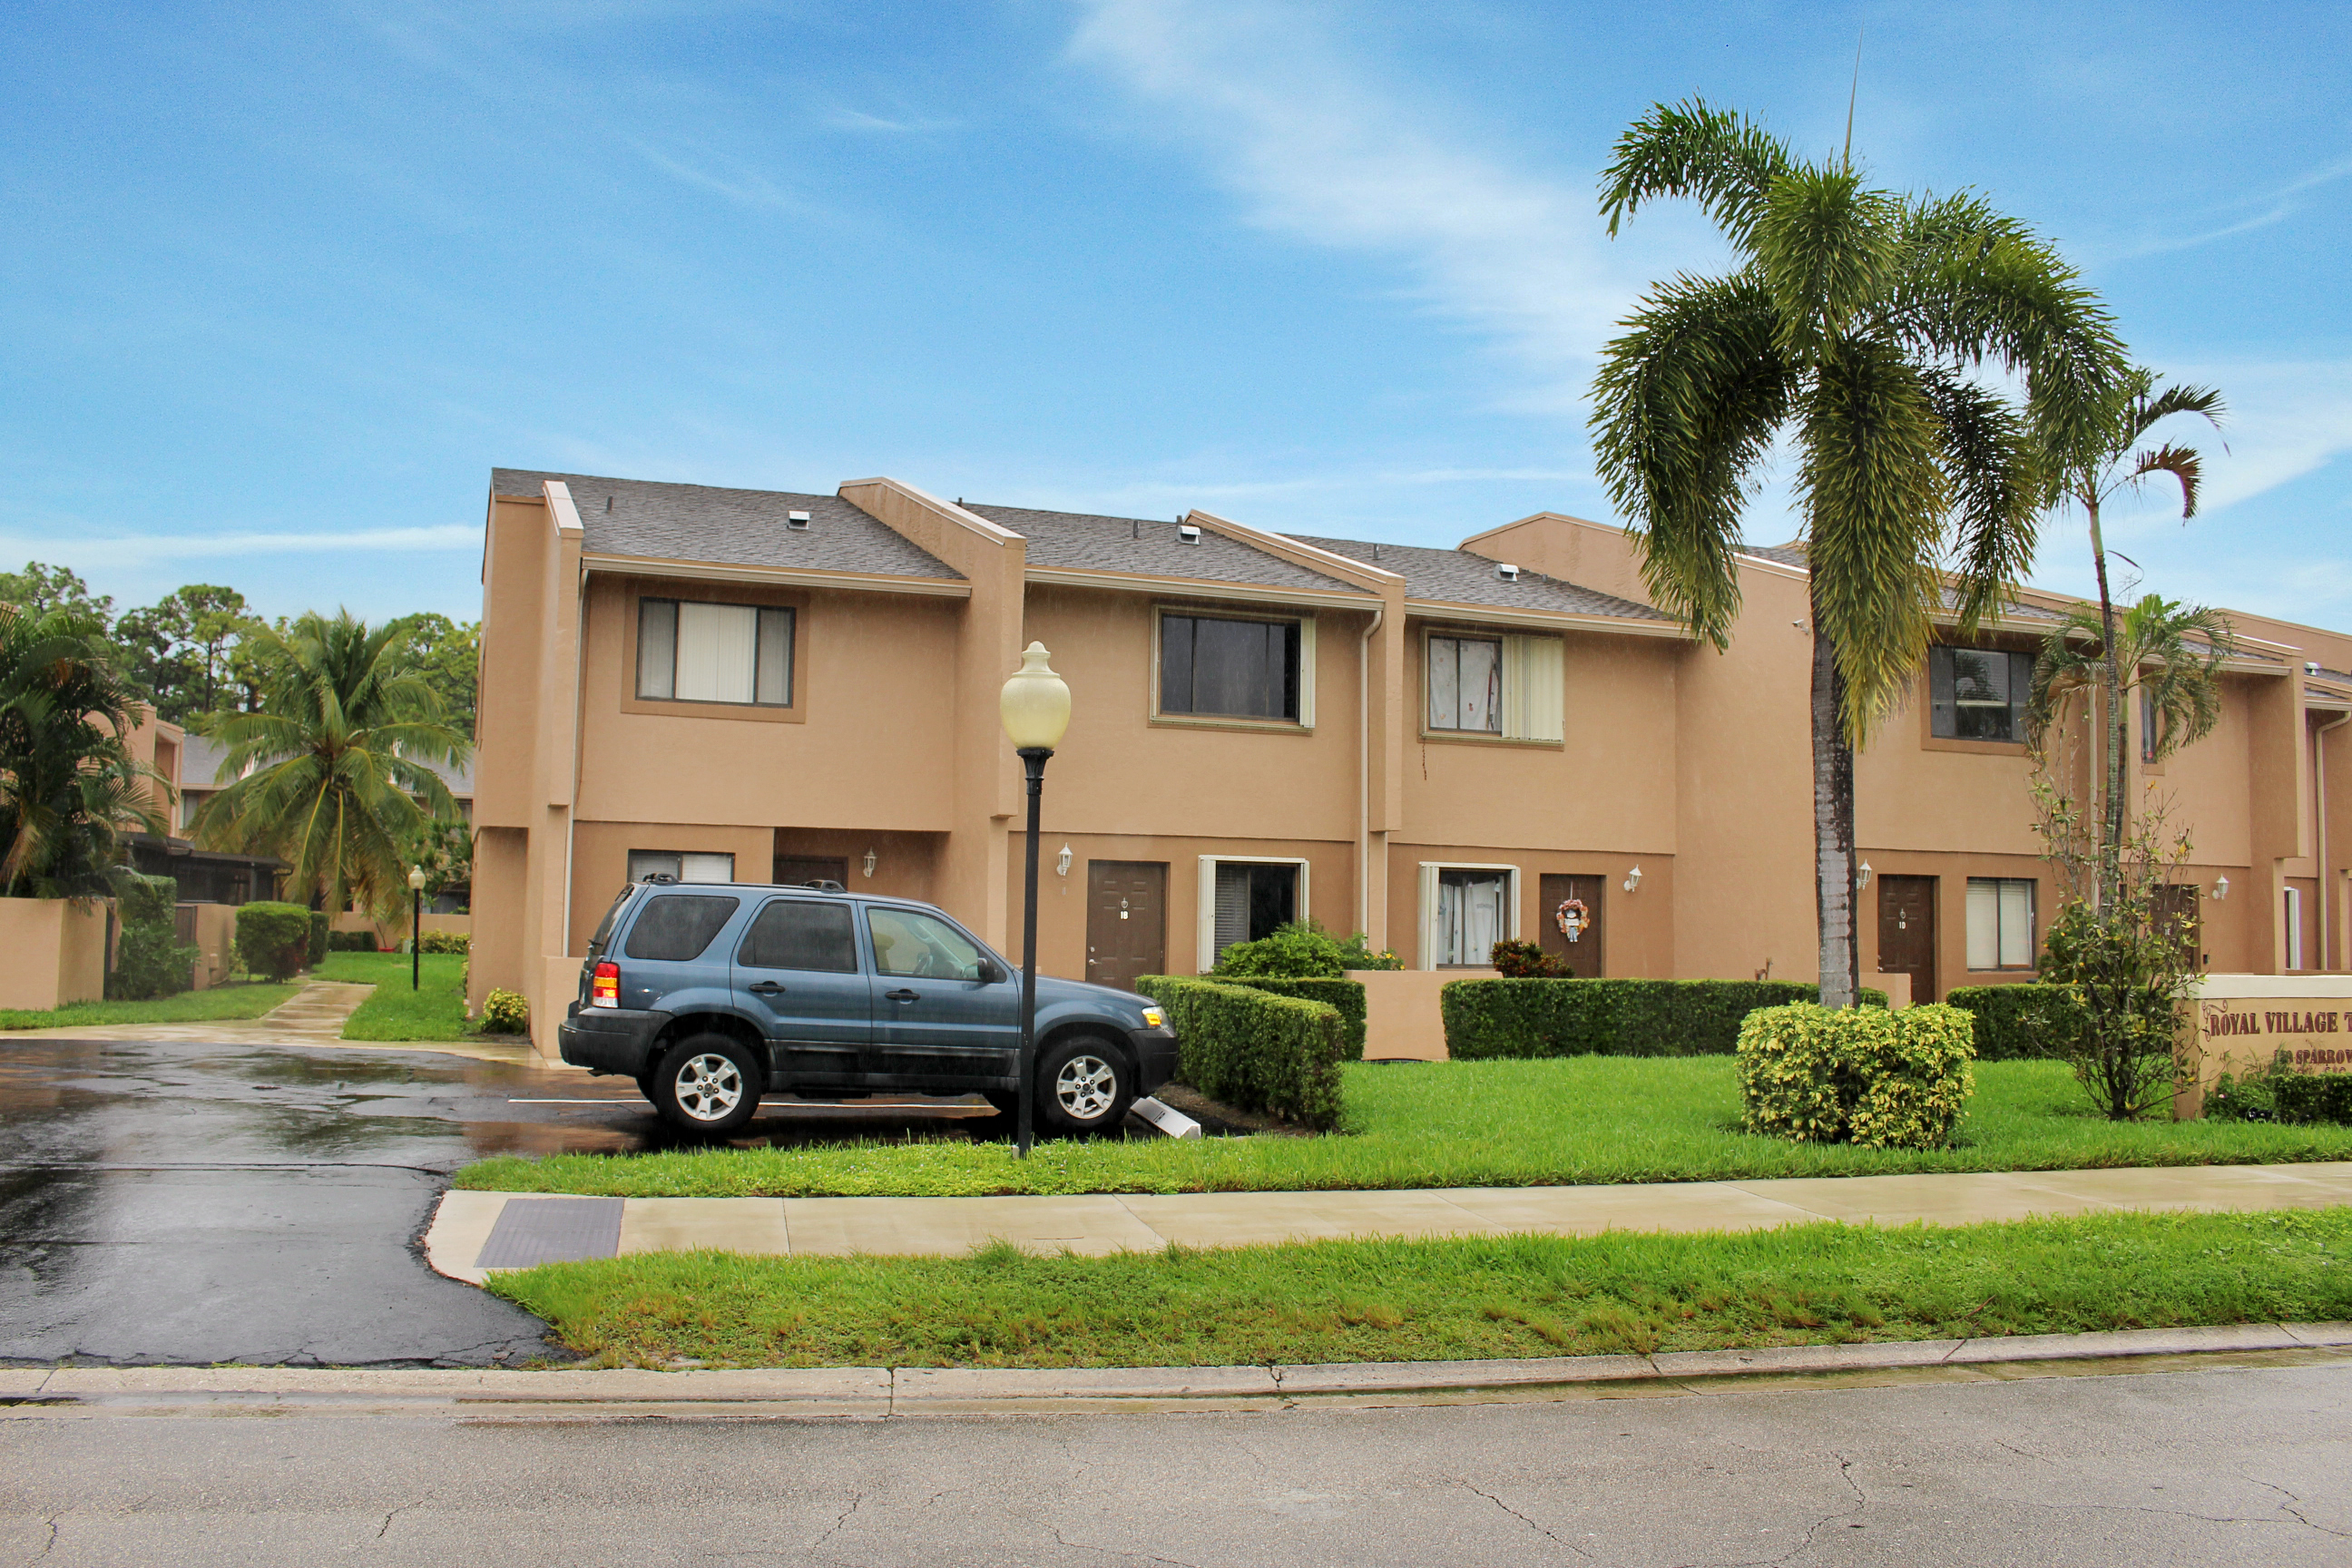 139 Sparrow Dr #1B, Royal Palm Beach, FL 33411 Was Sold By Top Royal Palm Beach Agents In Royal Village Townhouses